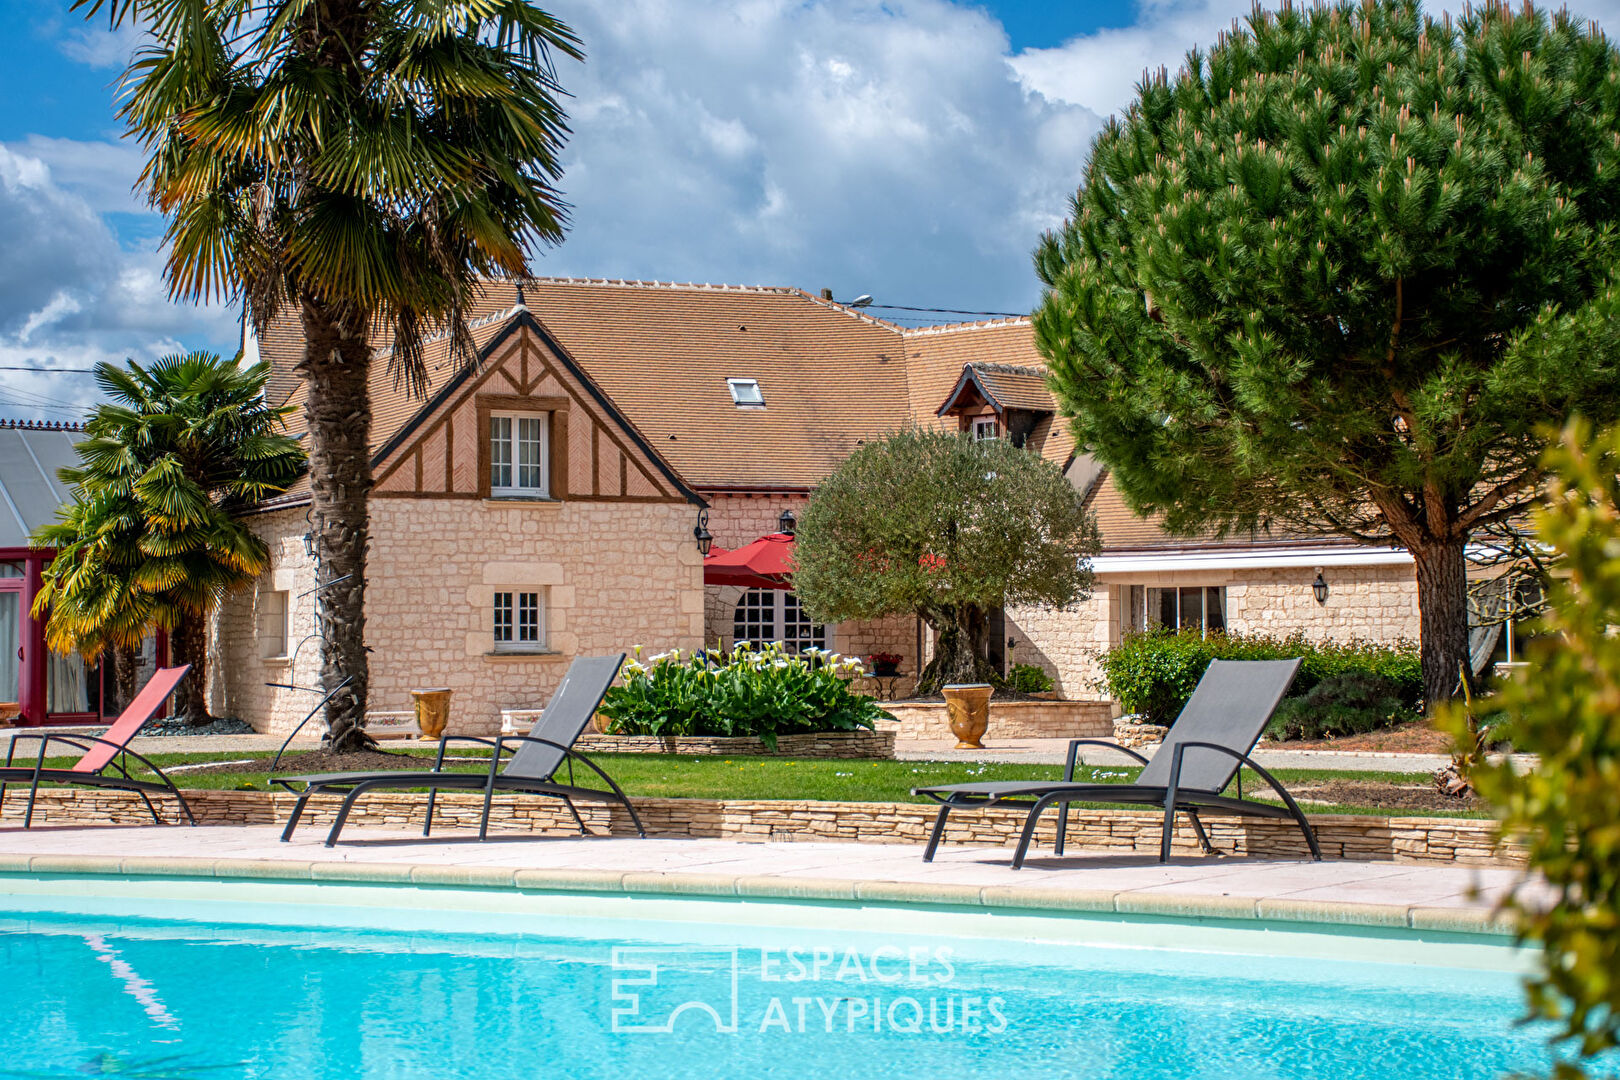 Elegant property with swimming pool, tennis and outbuildings